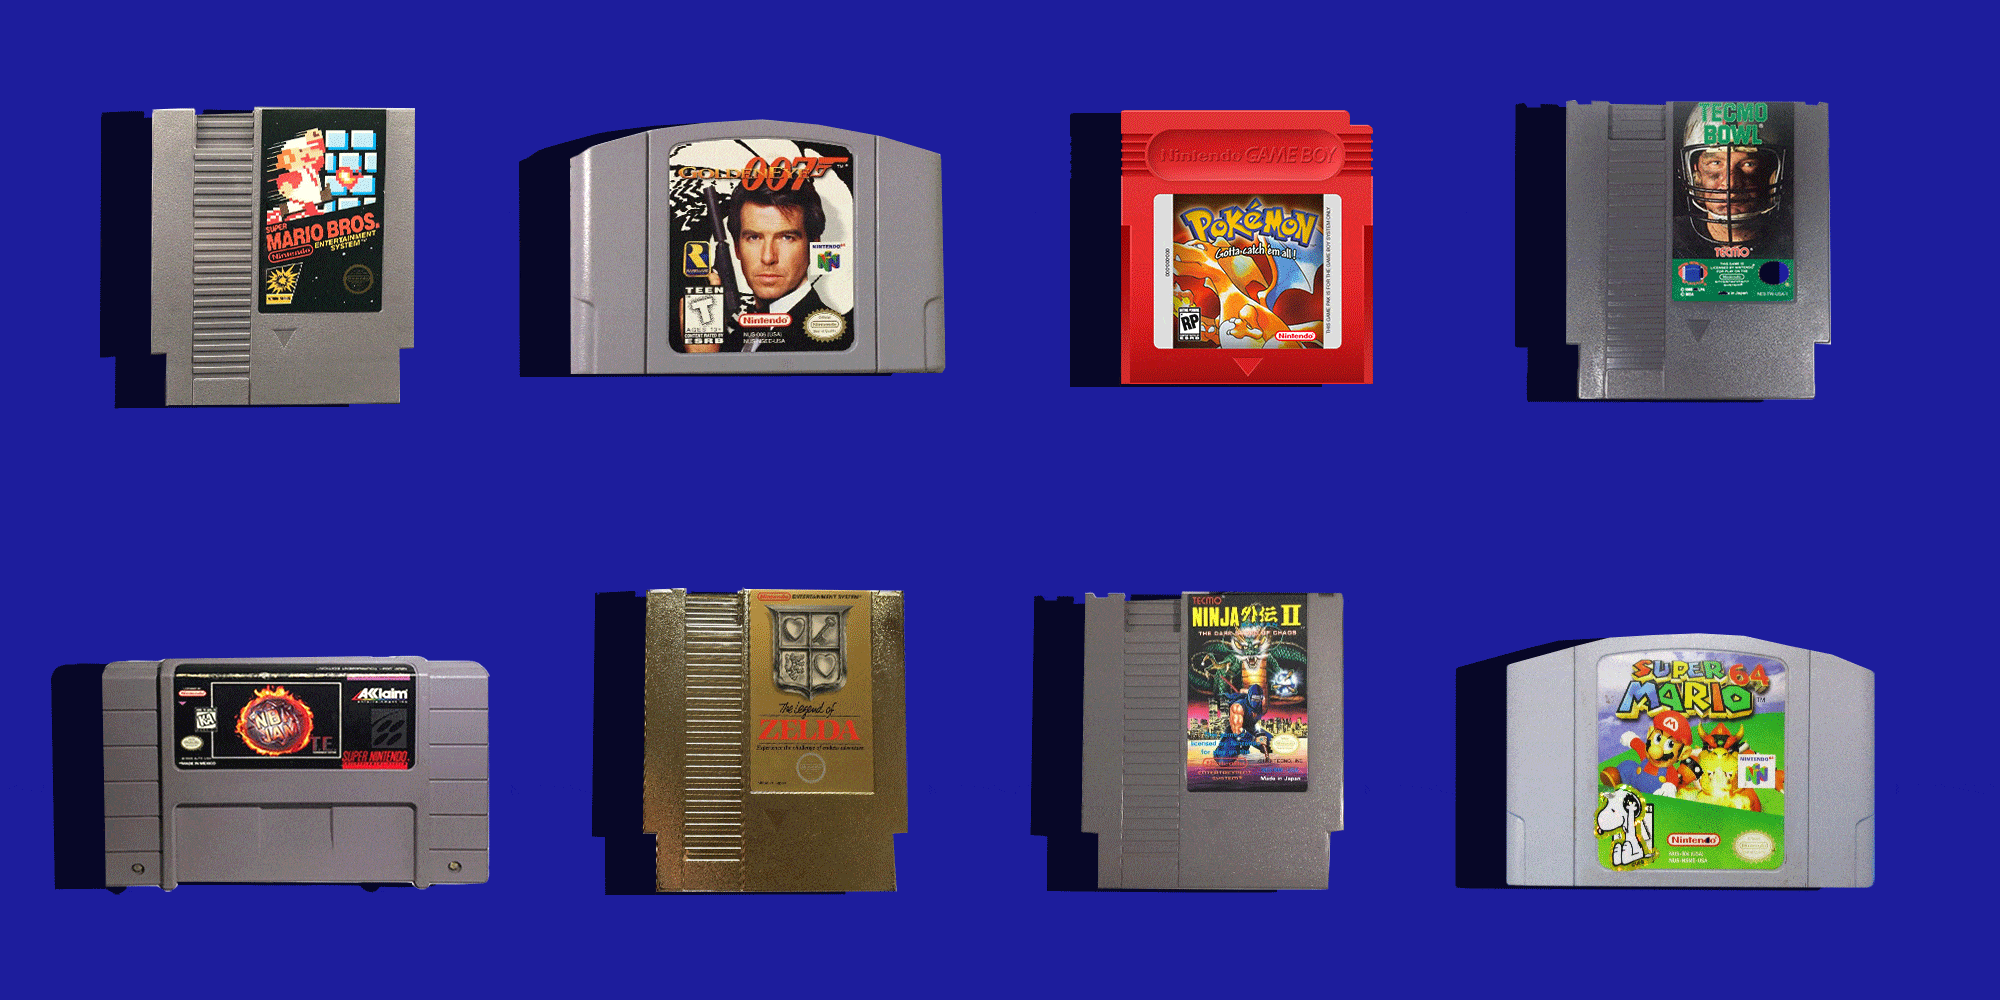 The best Nintendo games of all time